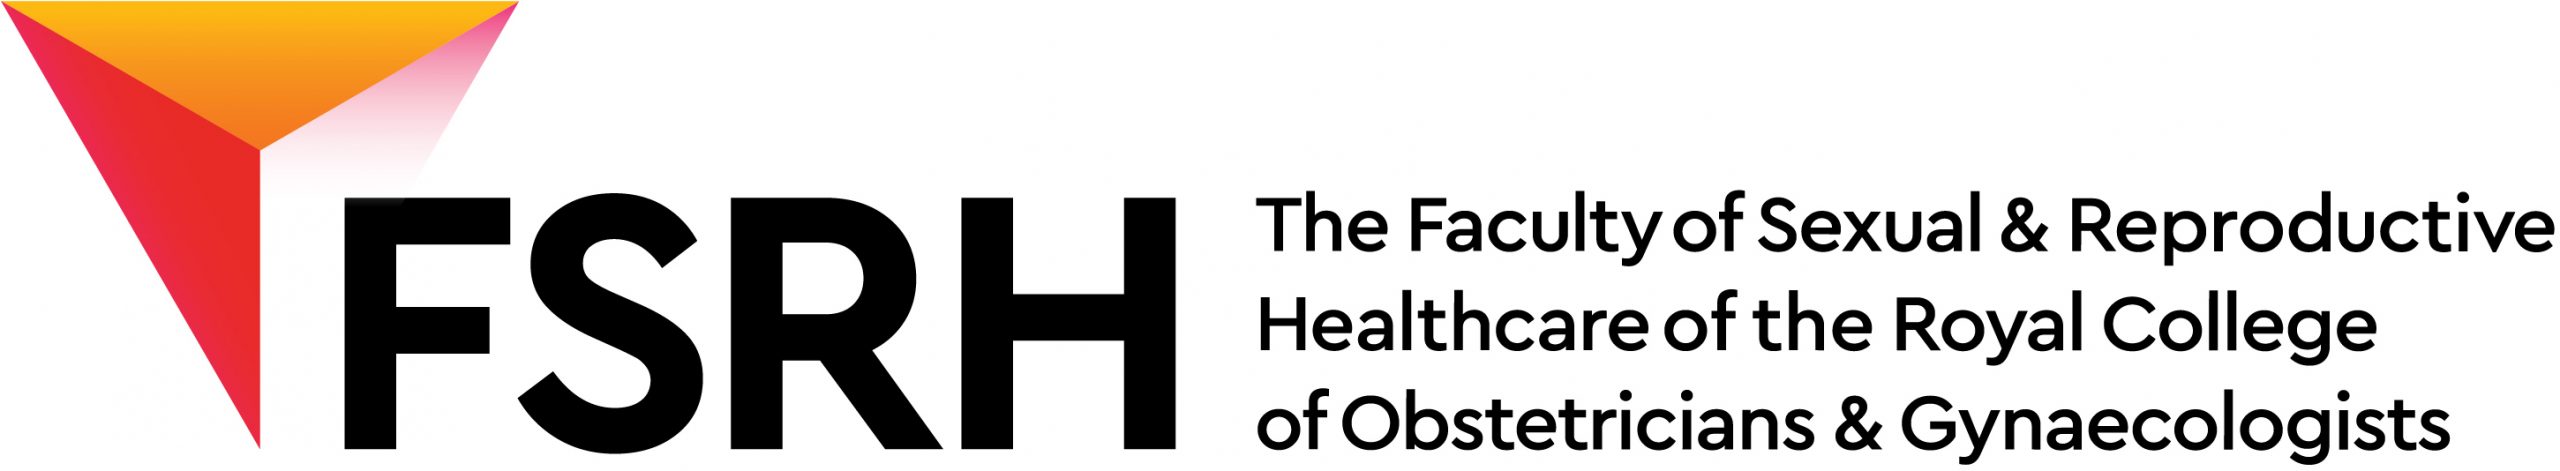 Faculty of Sexual and Reproductive Health (FSRH) Logo